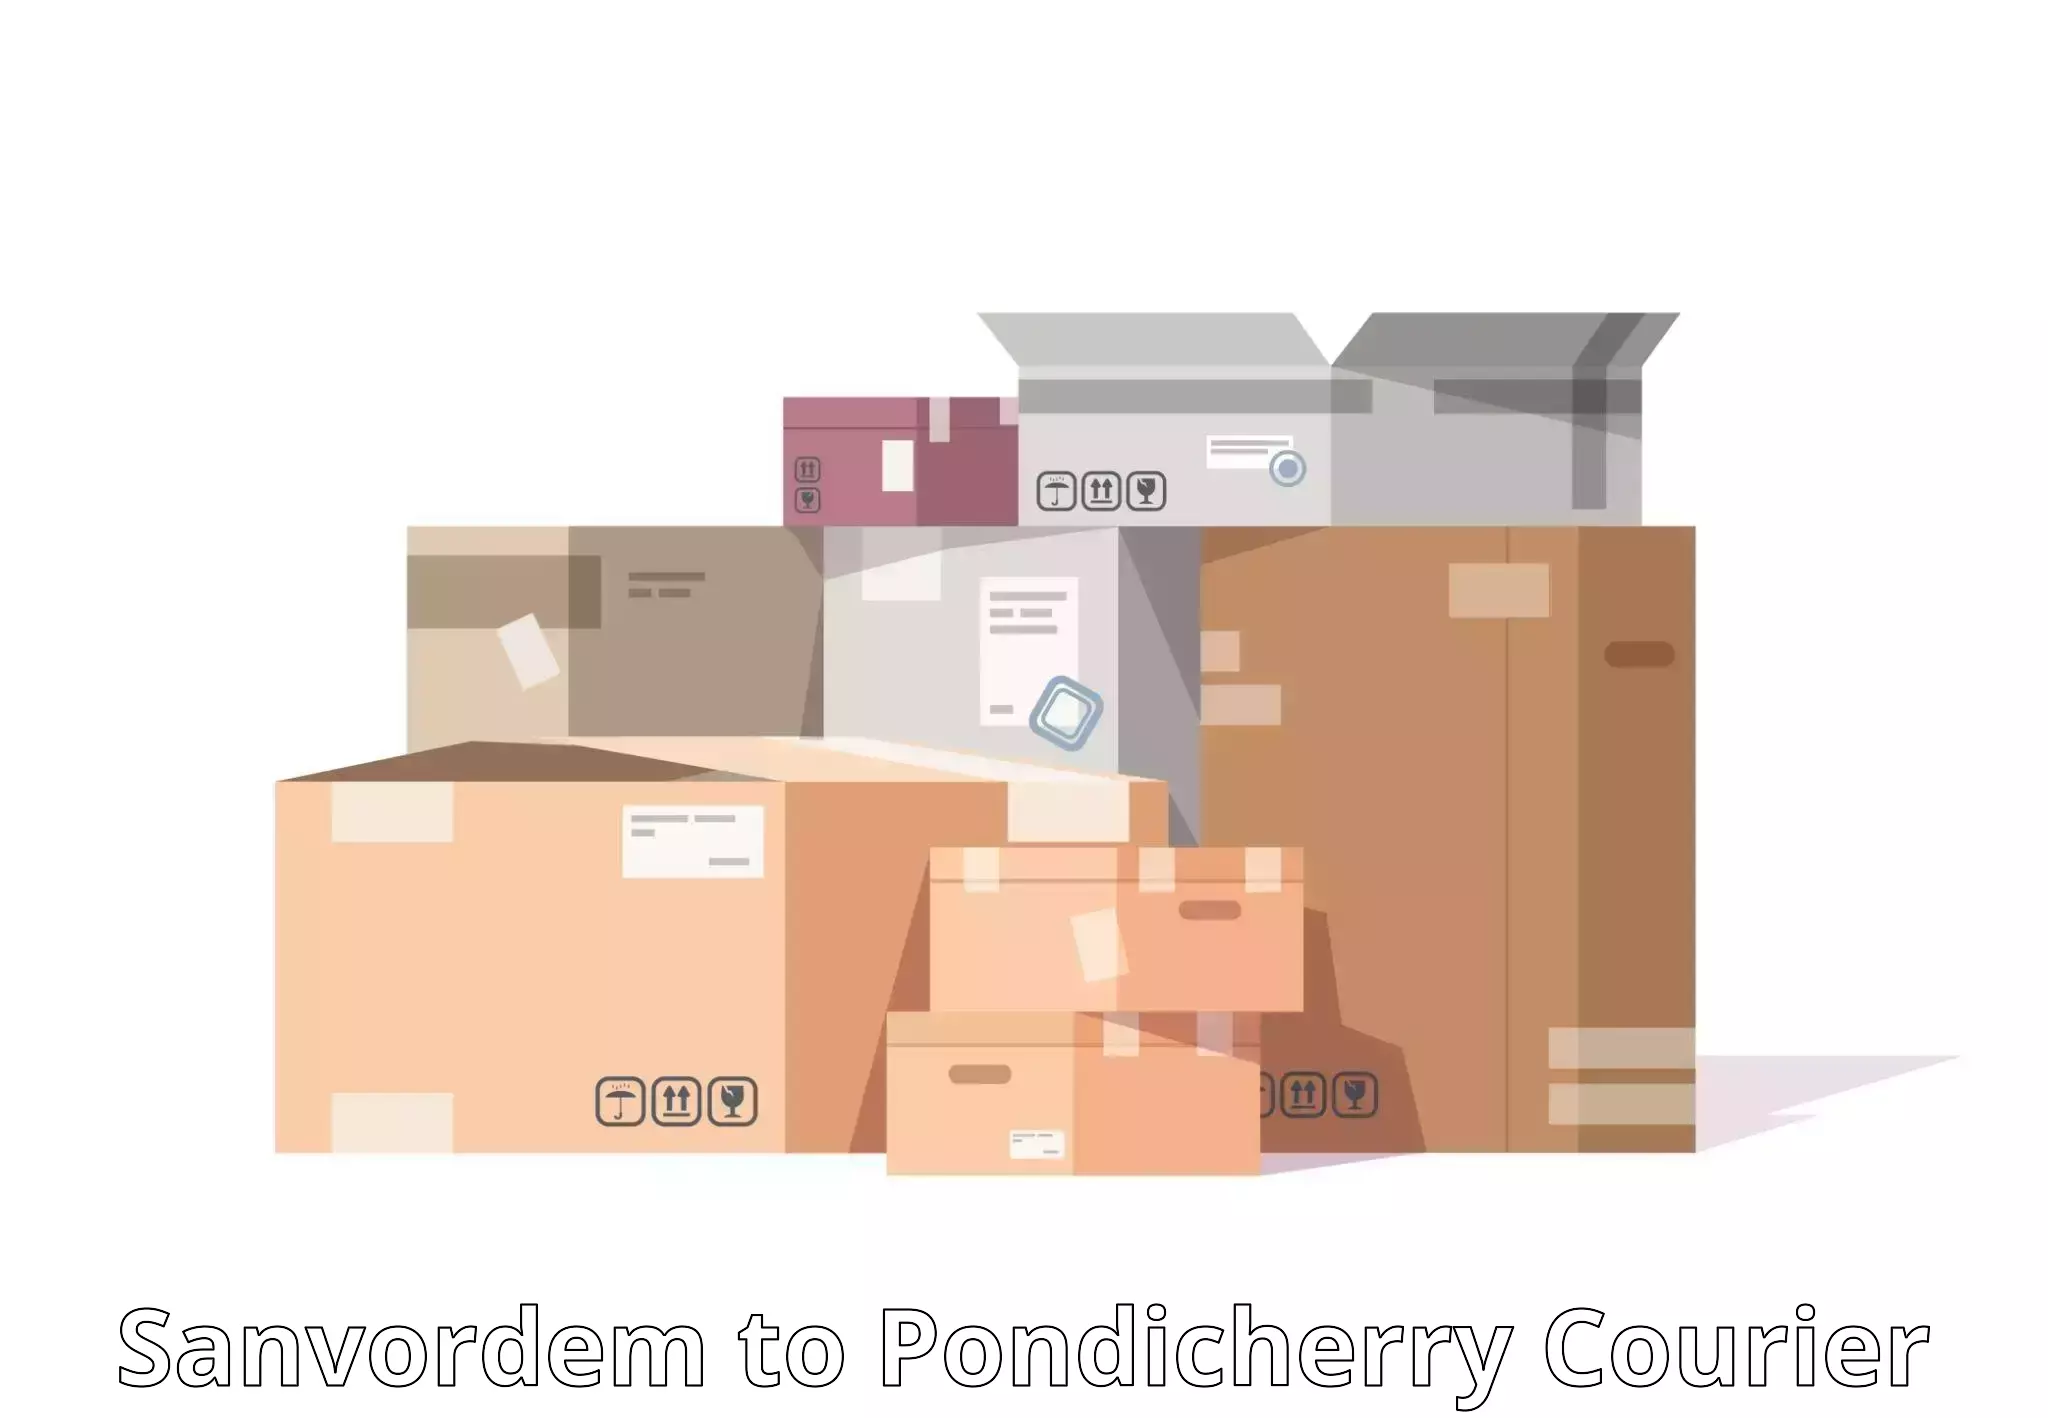 Package delivery network Sanvordem to Pondicherry